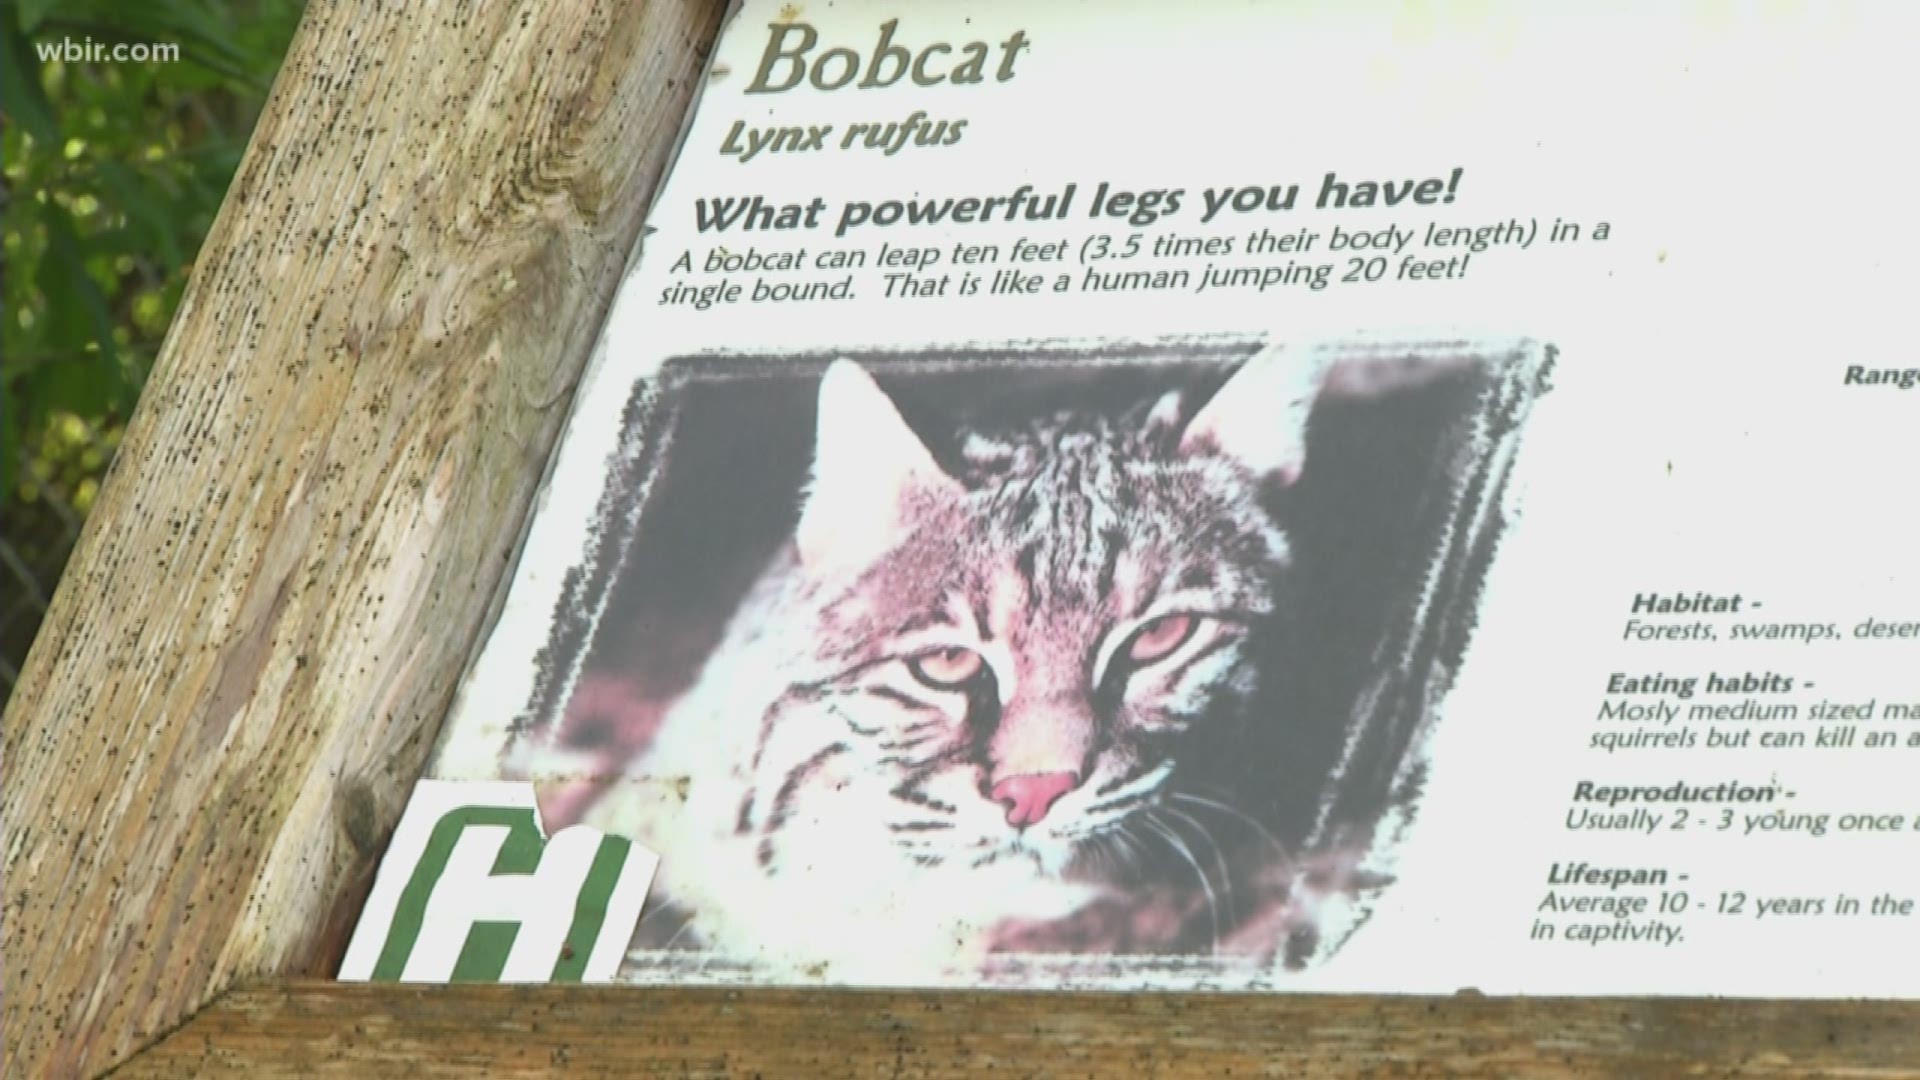 The bobcat that went missing from a Chattanooga nature center has been found. Nearly a week after Evi was last seen at Reflection Riding Arboretum and Nature Center, the bobcat was found on trails on Lookout Mountain.